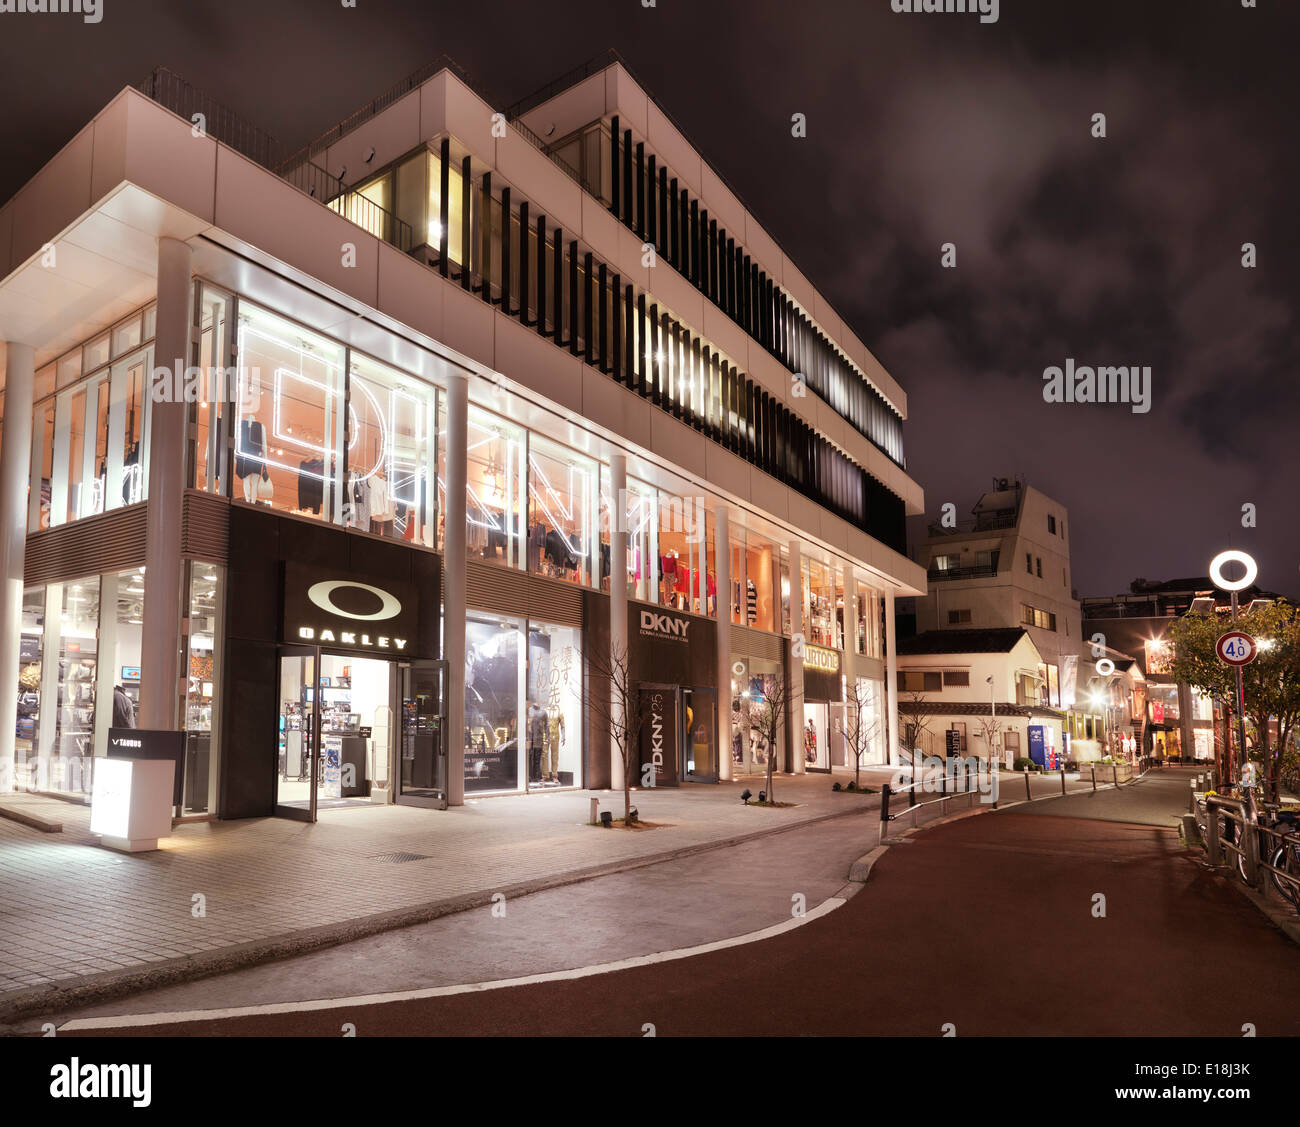 oakley clothing store